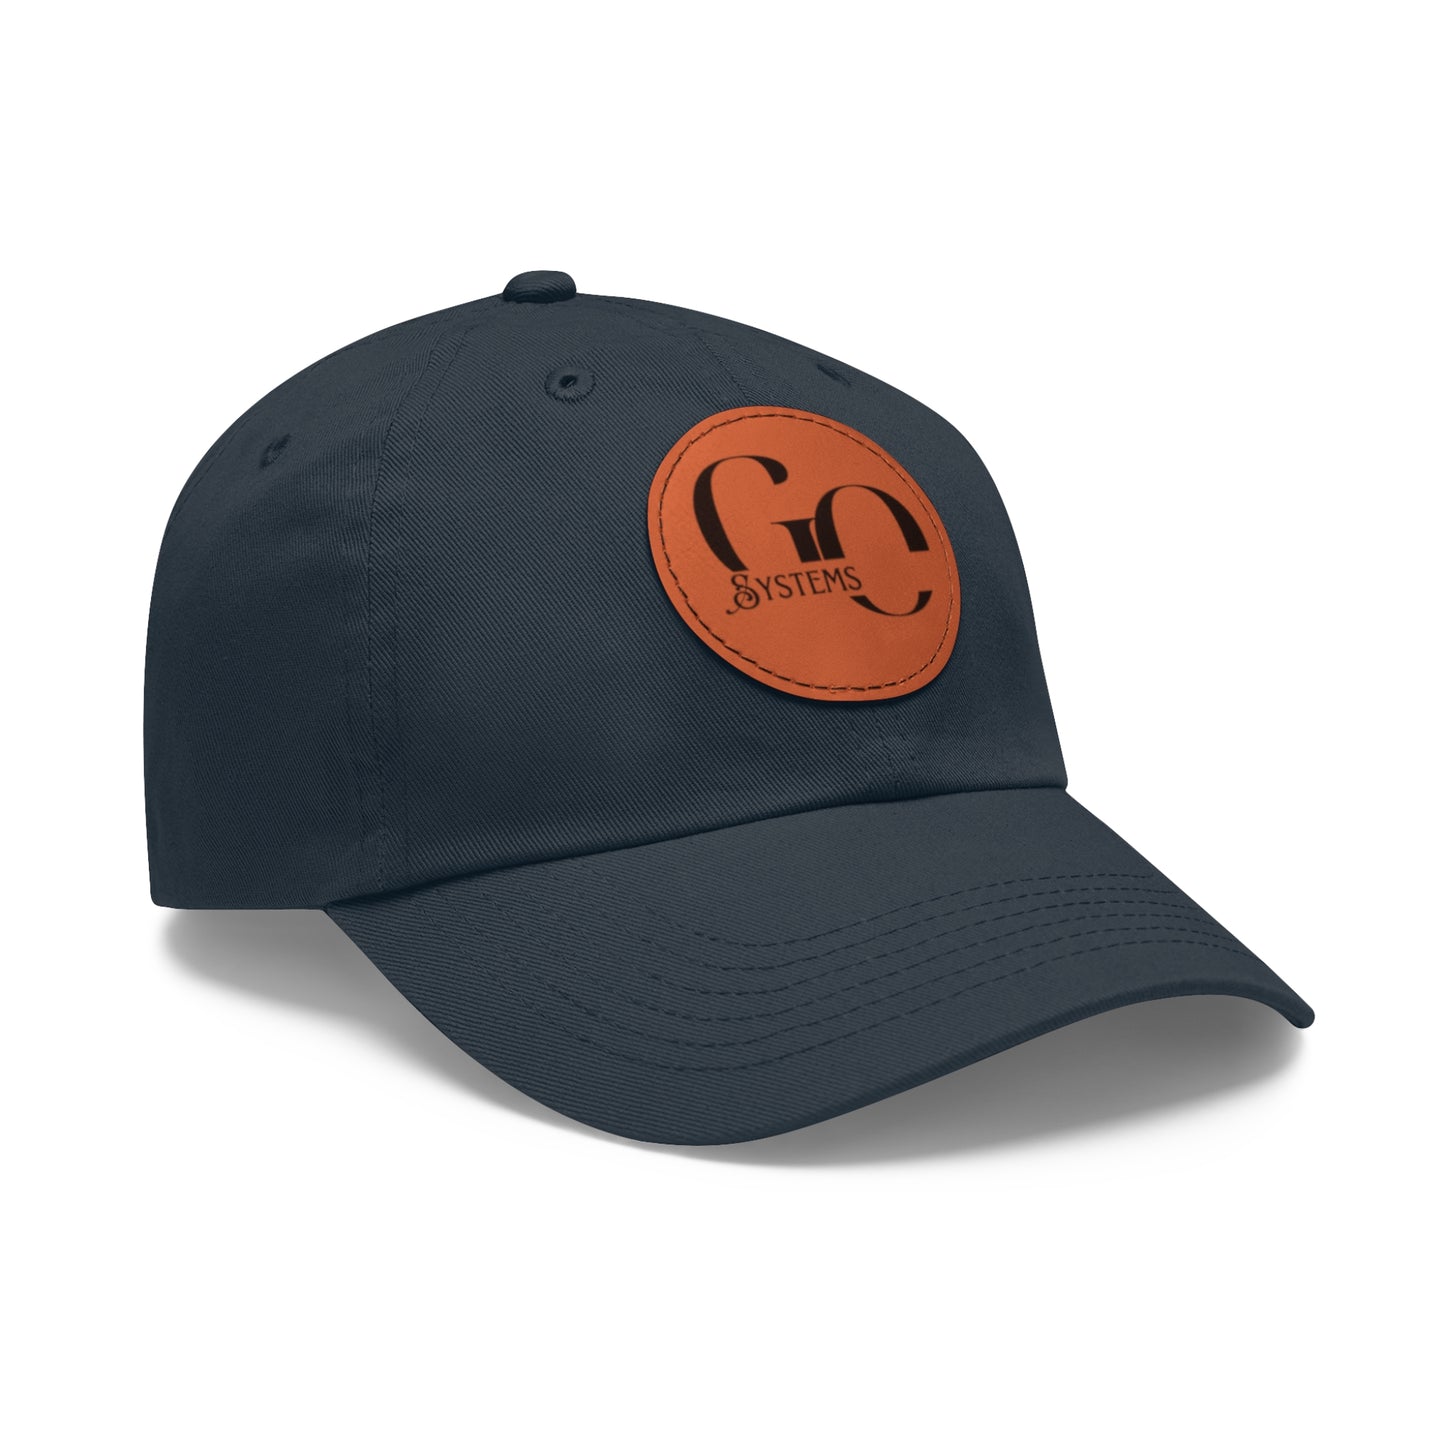 Go systems work Hats